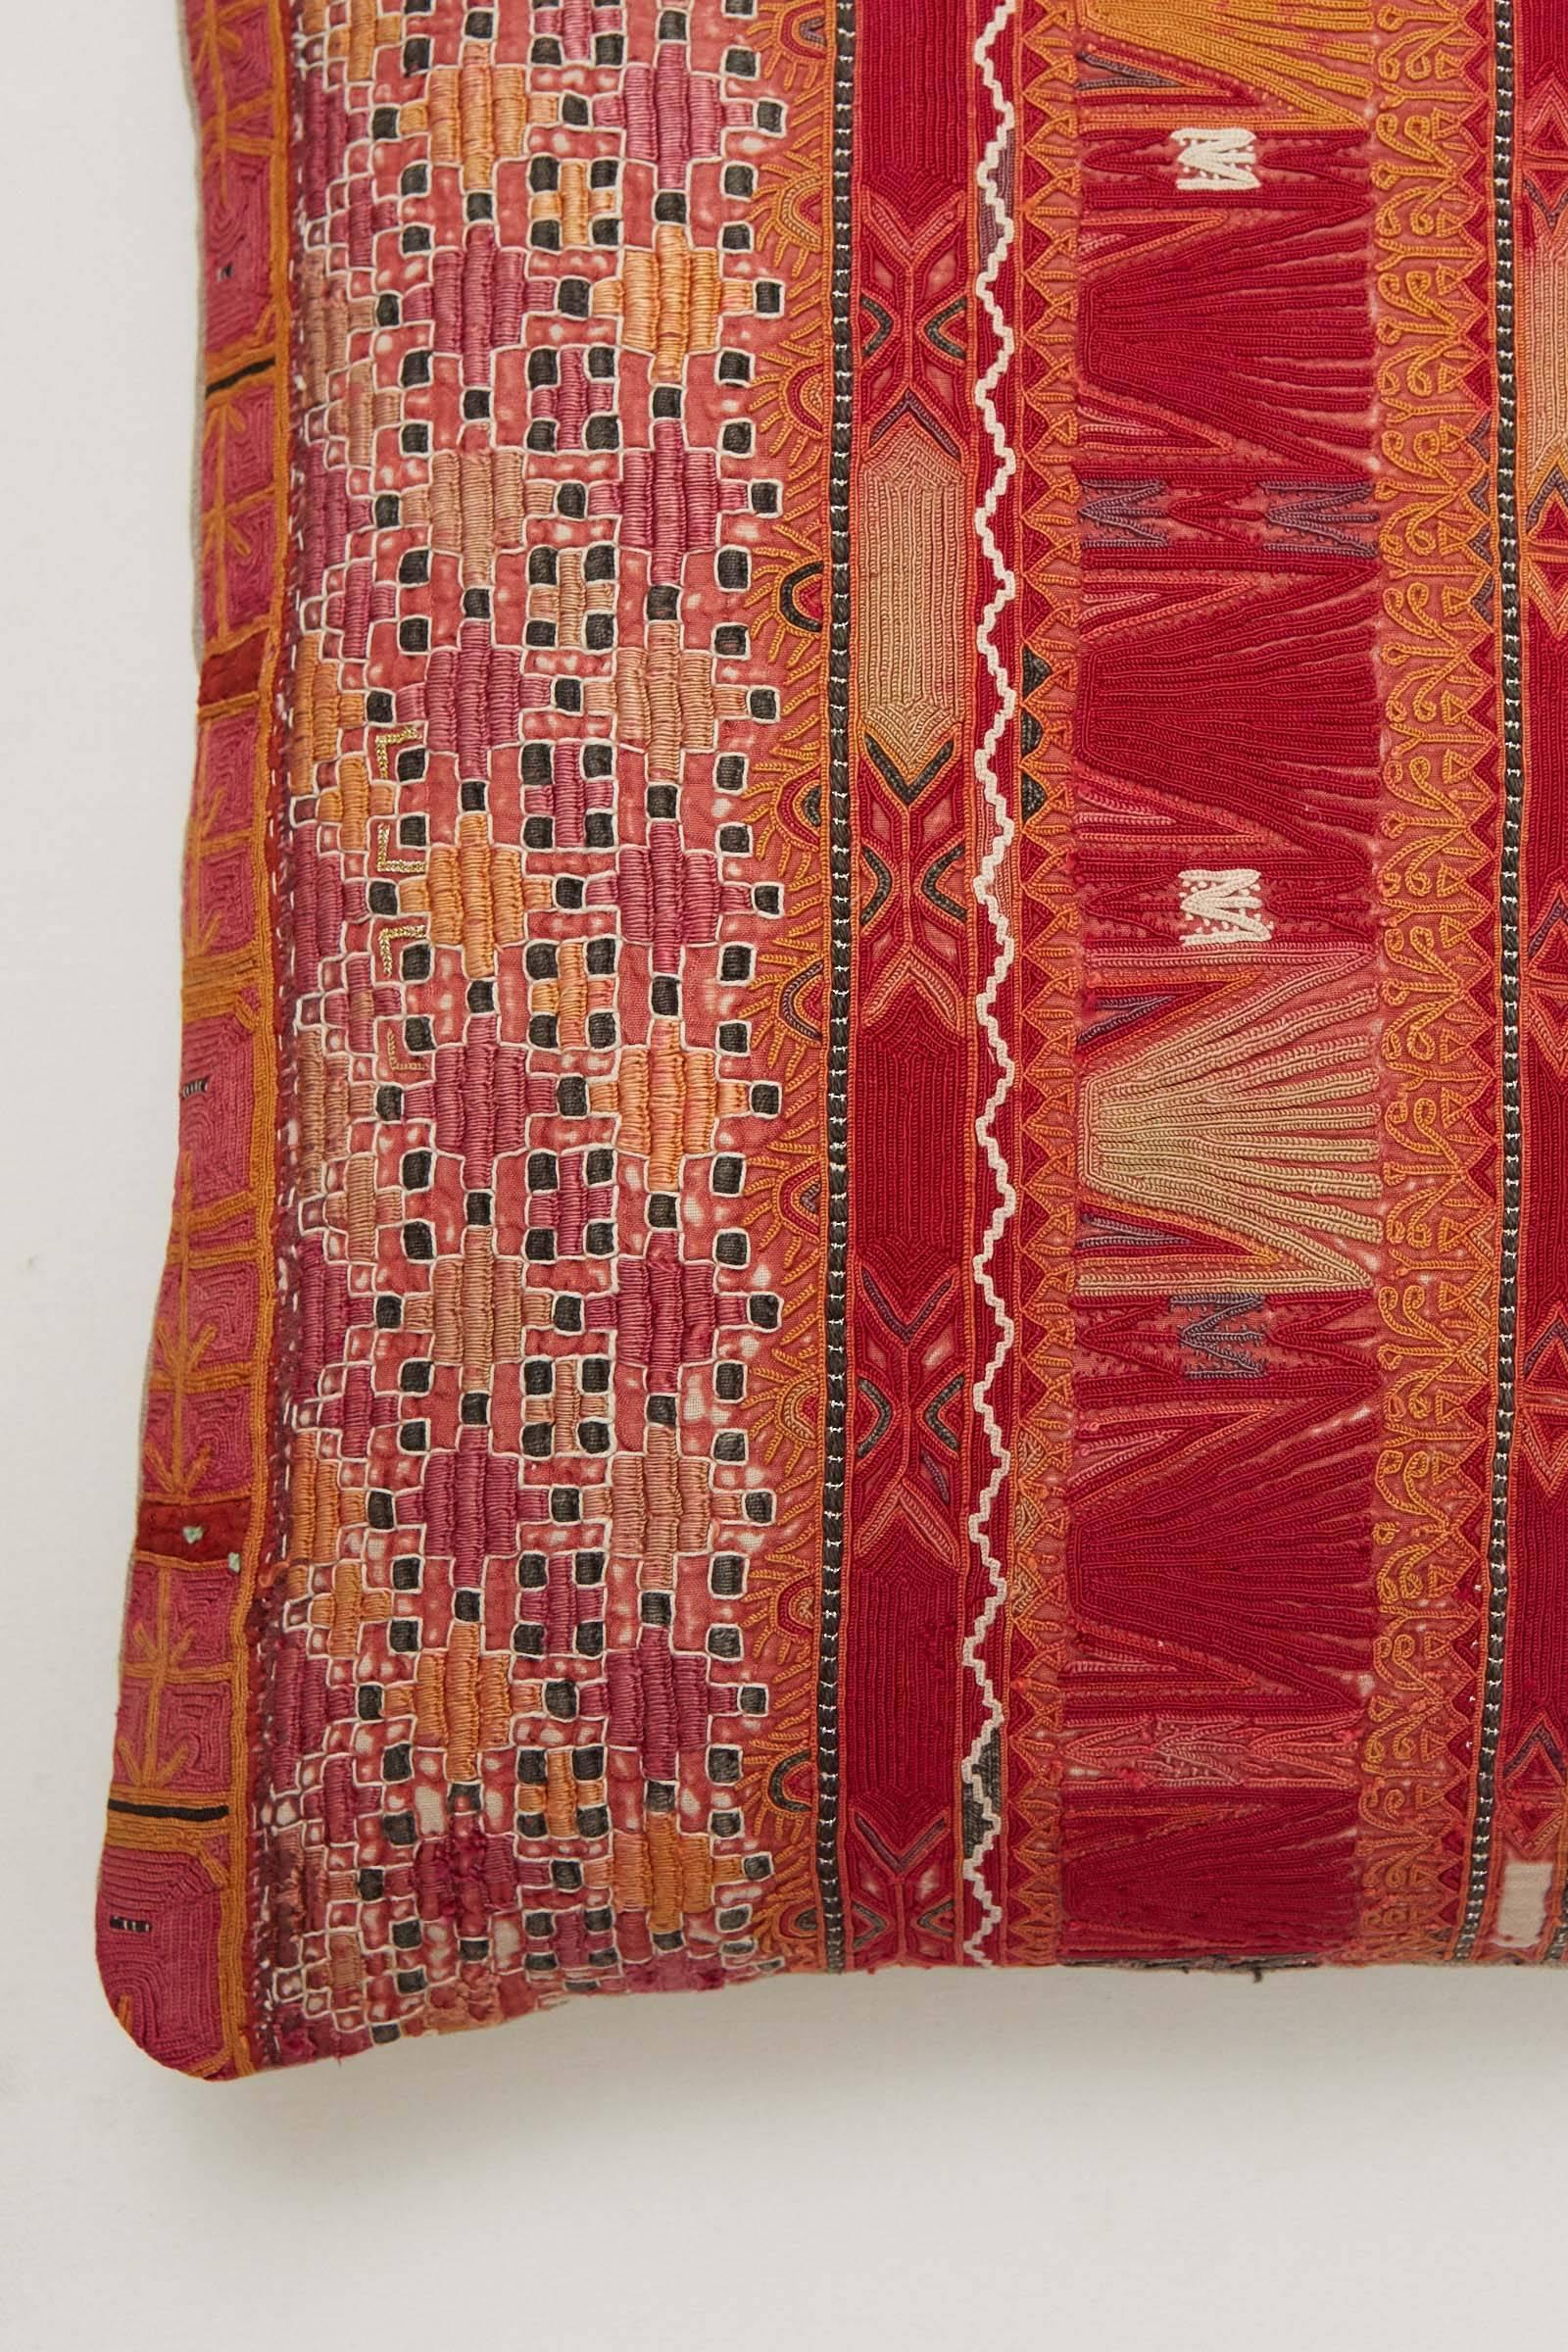 Intricately embroidered silk on cotton vintage textile. Measures: 17 x 19. Pink, orange, black, celadon. Sleeve fragment from a Pashtun tribal tunic. Natural linen back. Invisible zipper. Feather and down fill.
 